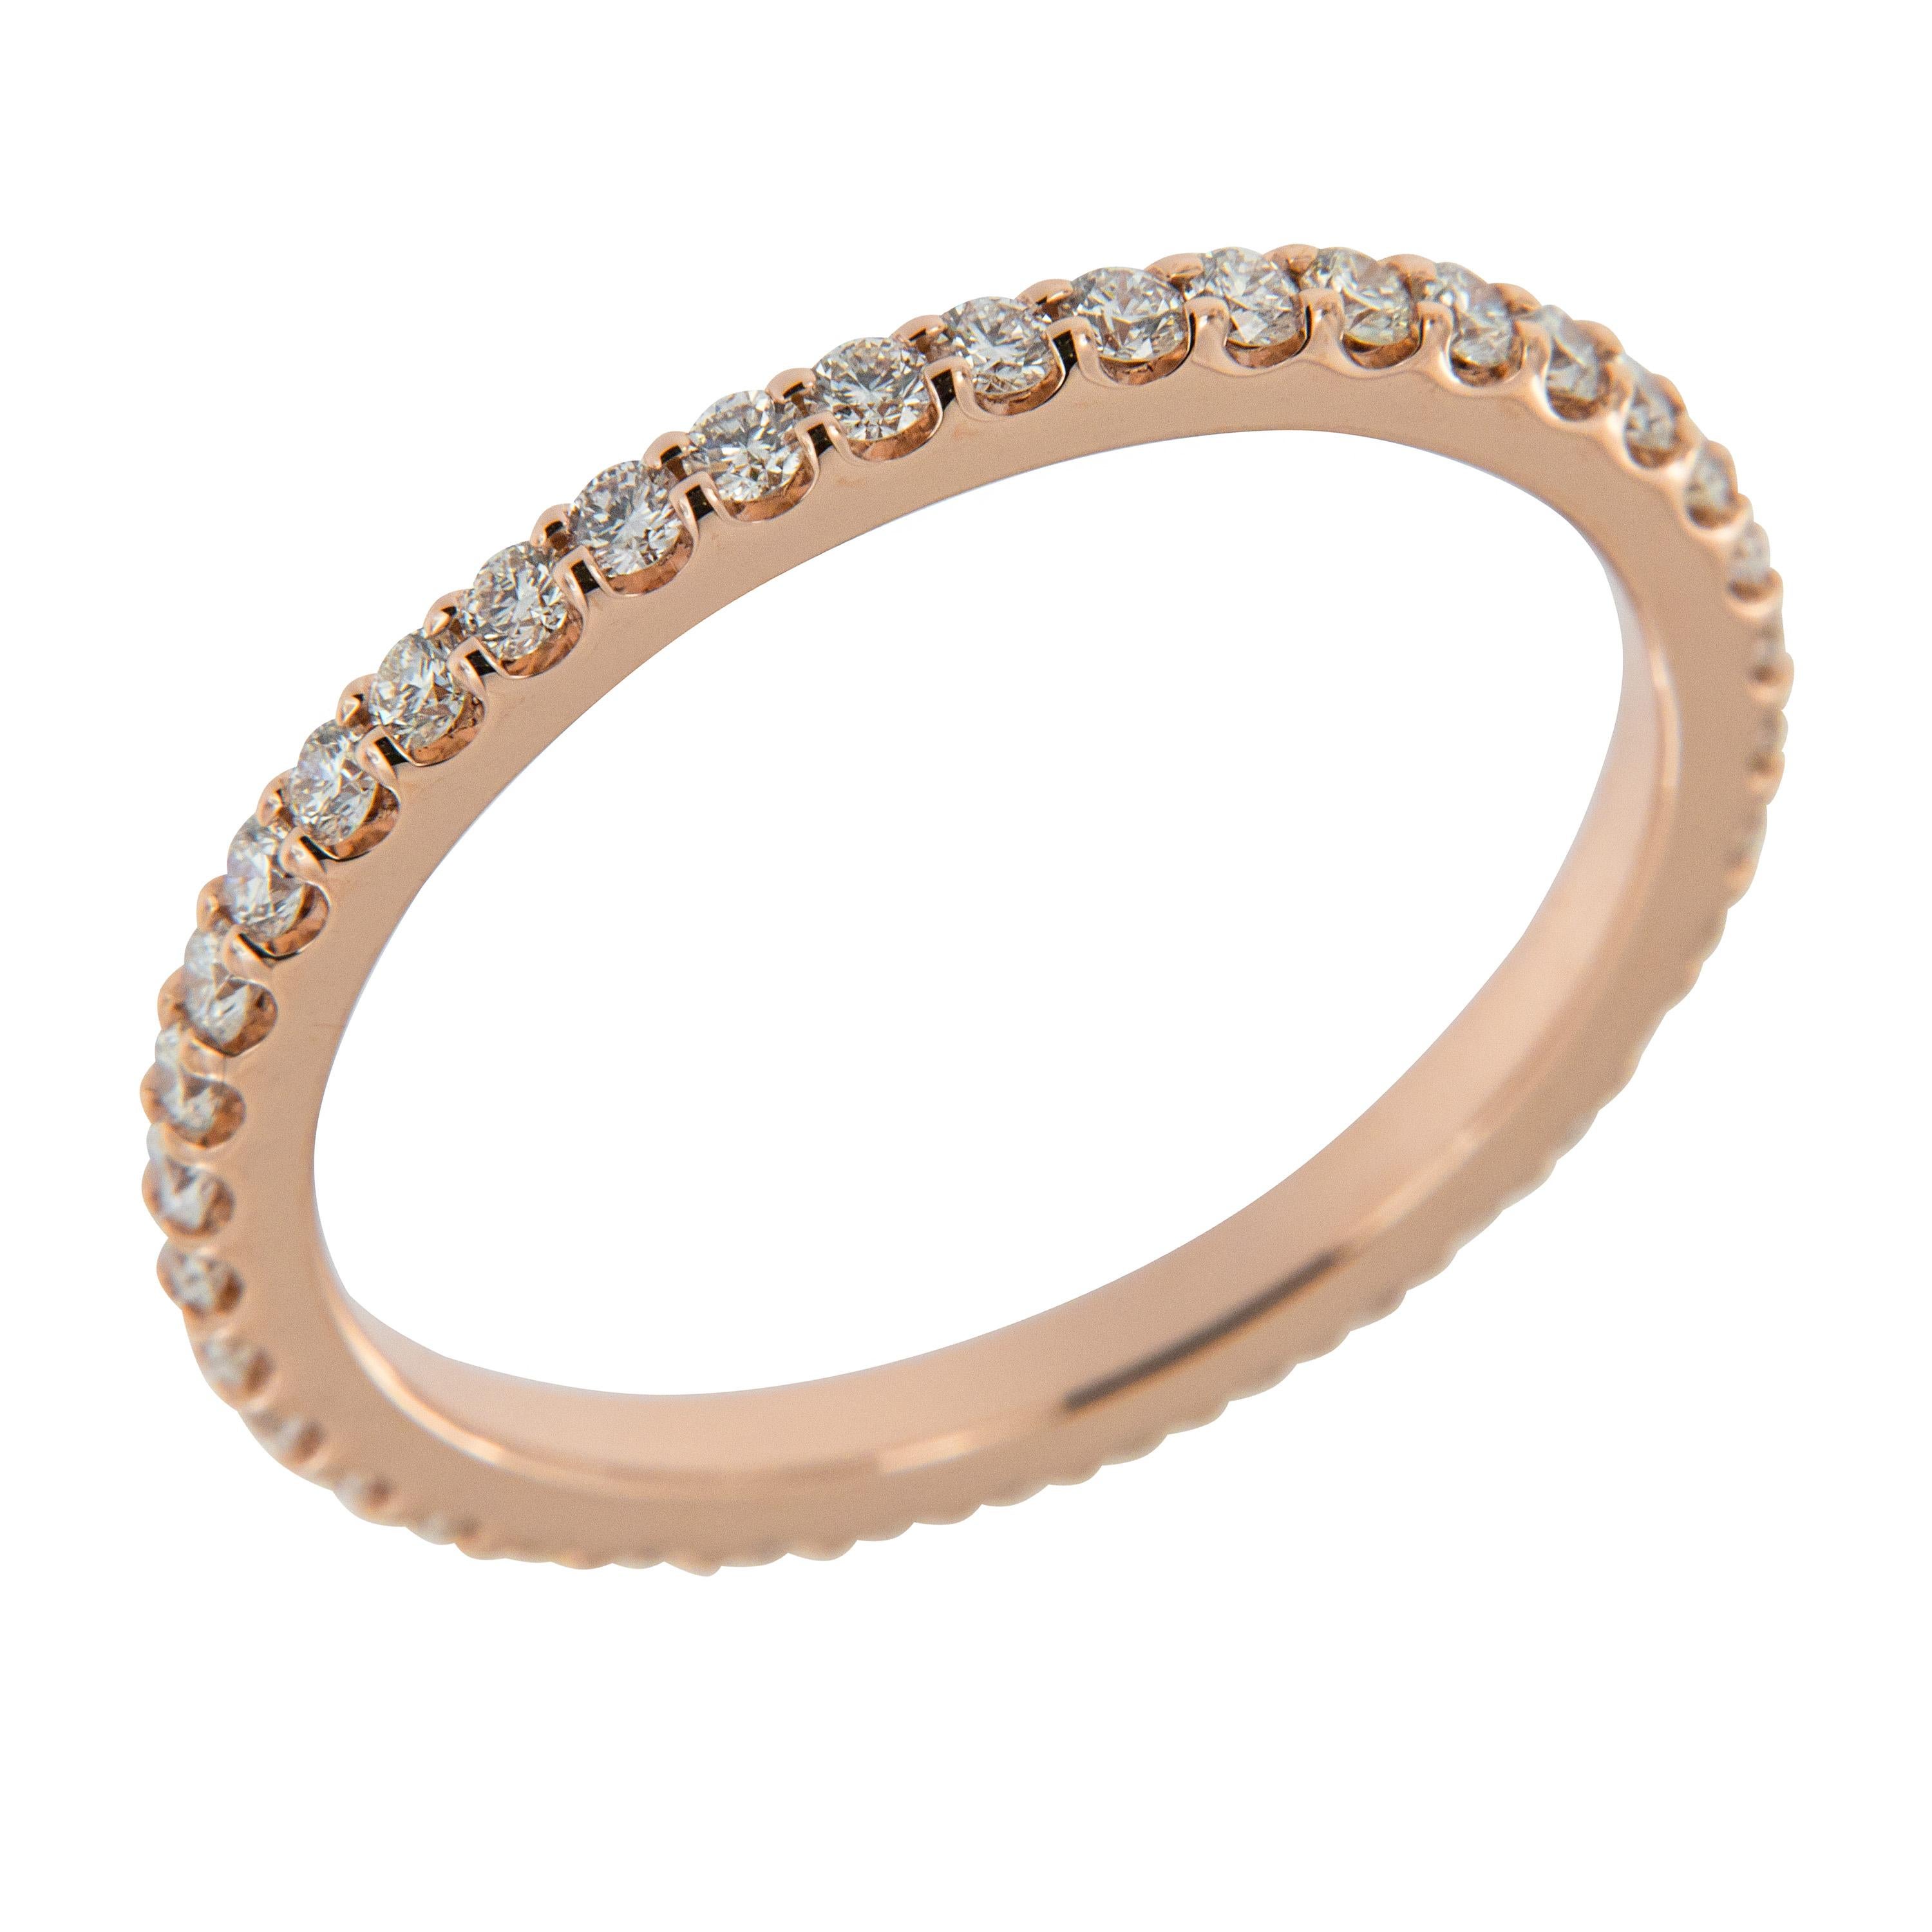 One of the most popular requests we get is for this ring! Soft hued, 14 karat rose gold eternity band accented with 39 diamonds = 0.49 Cttw (G-H, SI) in a size 6. This ring looks fantastic alone & just as beautiful stacked with others! Can be custom